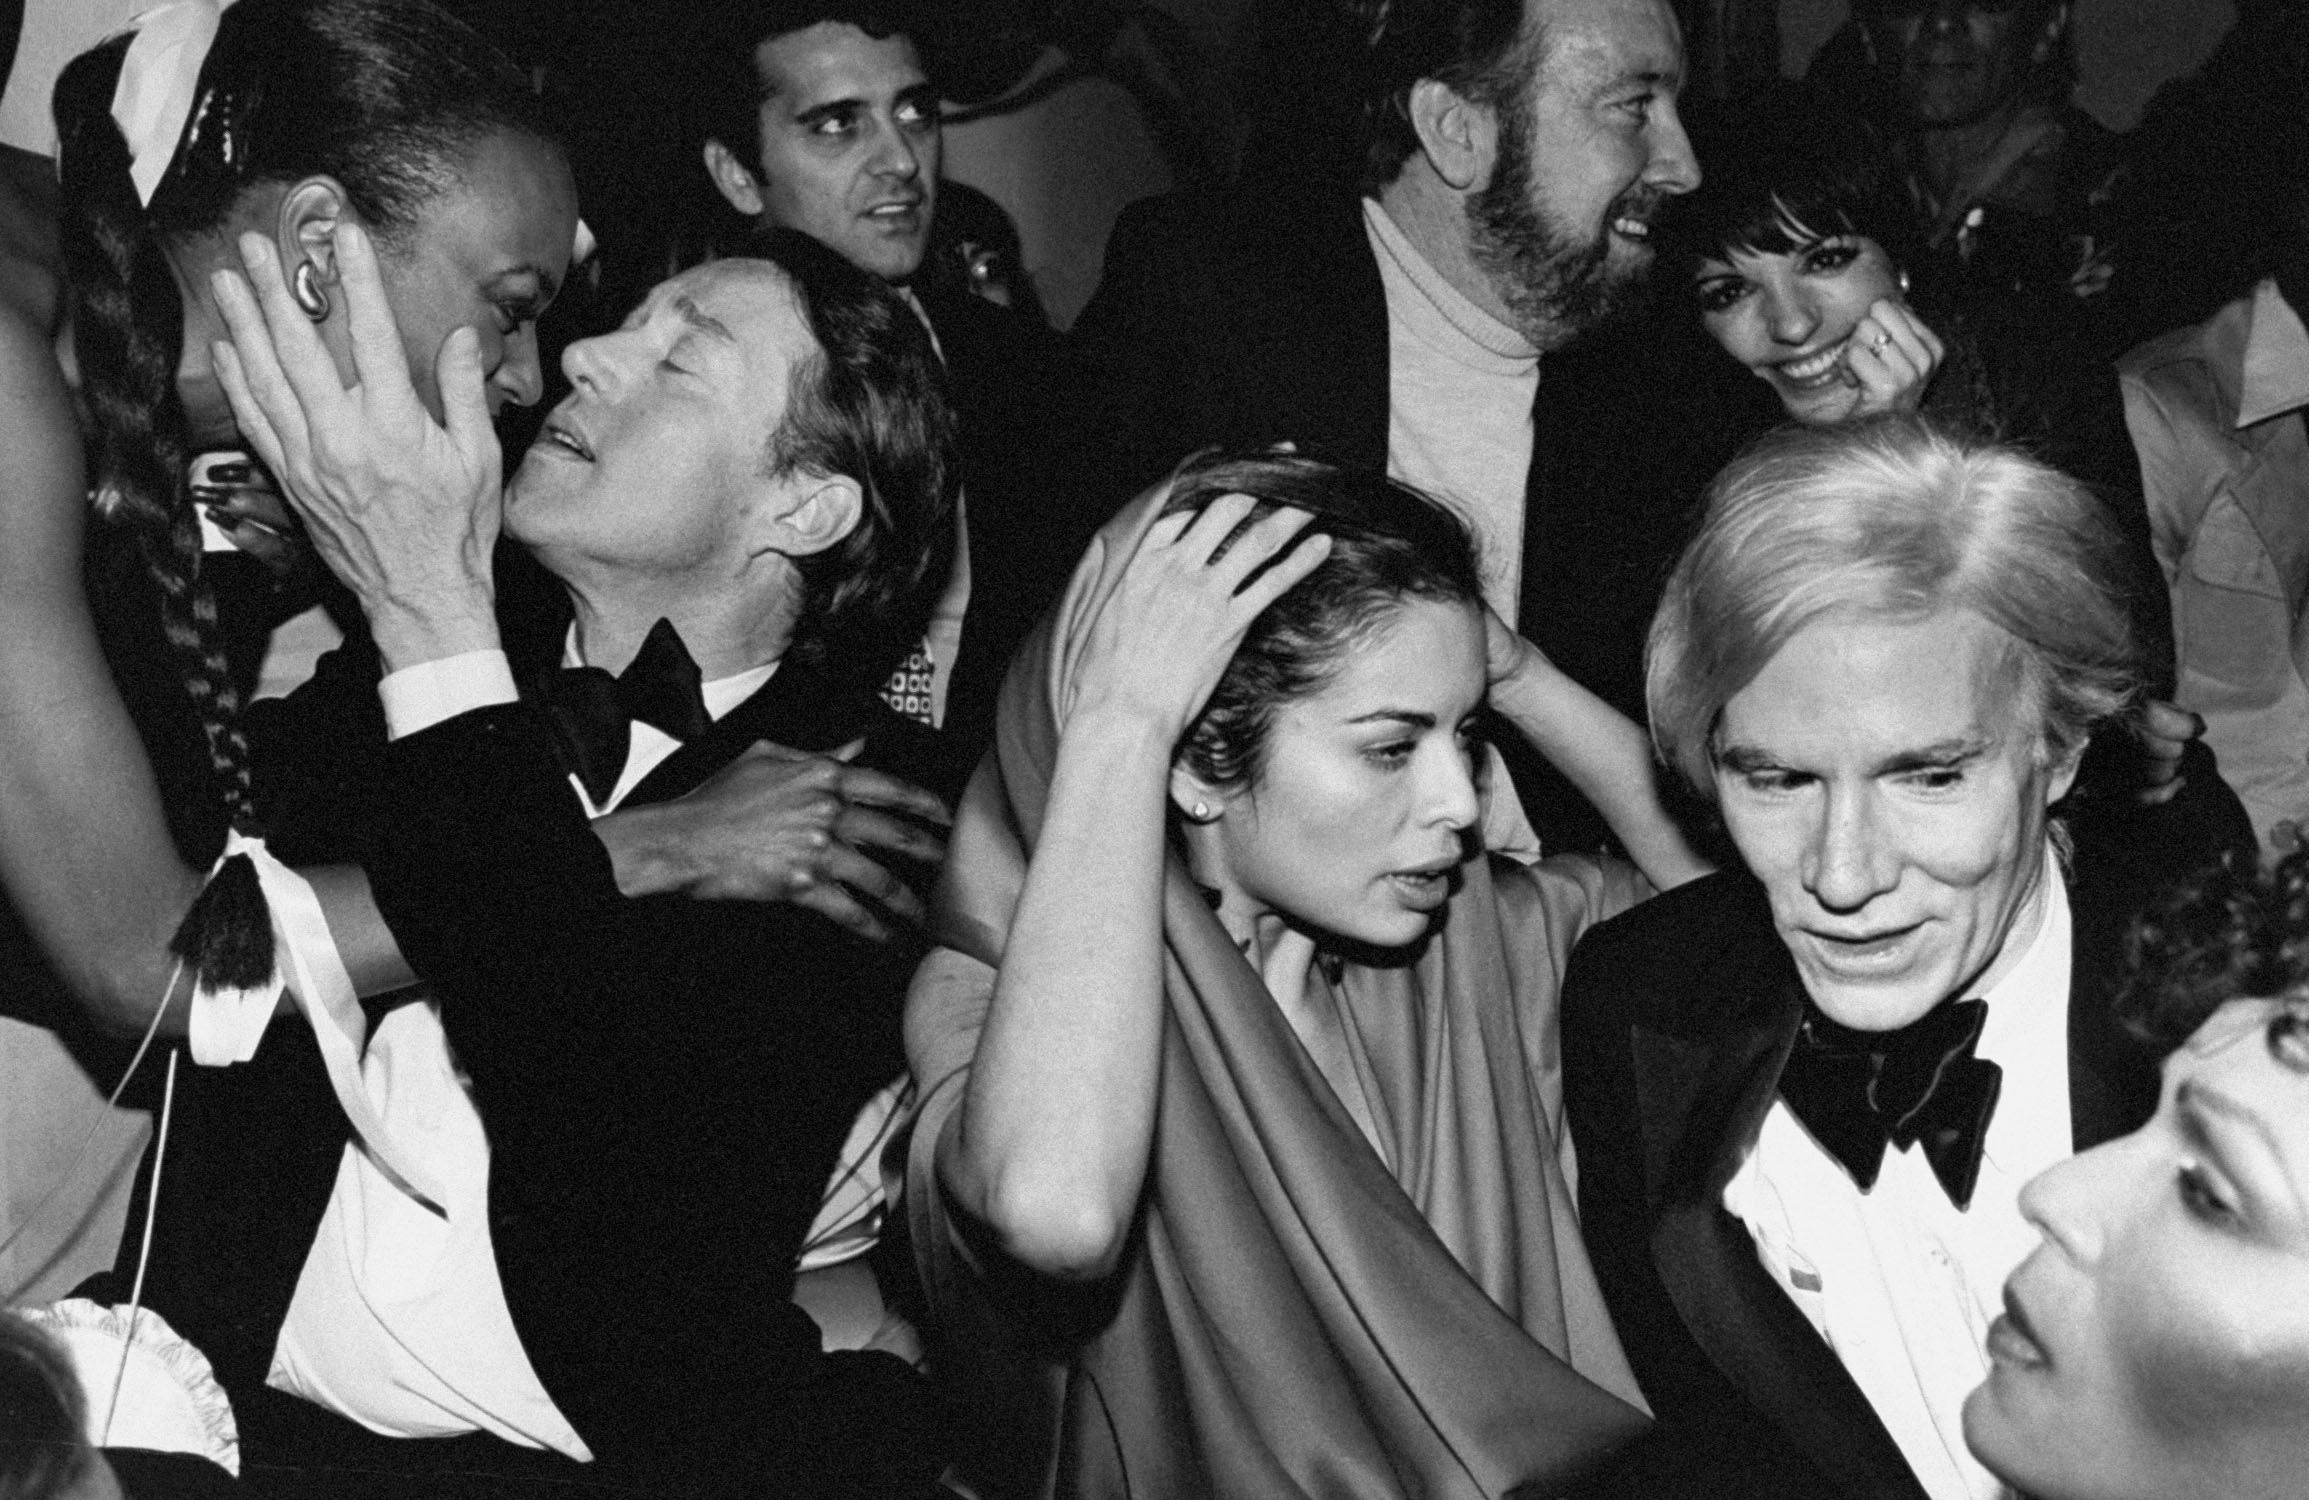 Vintage Photos of Disco Fever and Studio 54 Scene - 40th Anniversary of  The Hustle